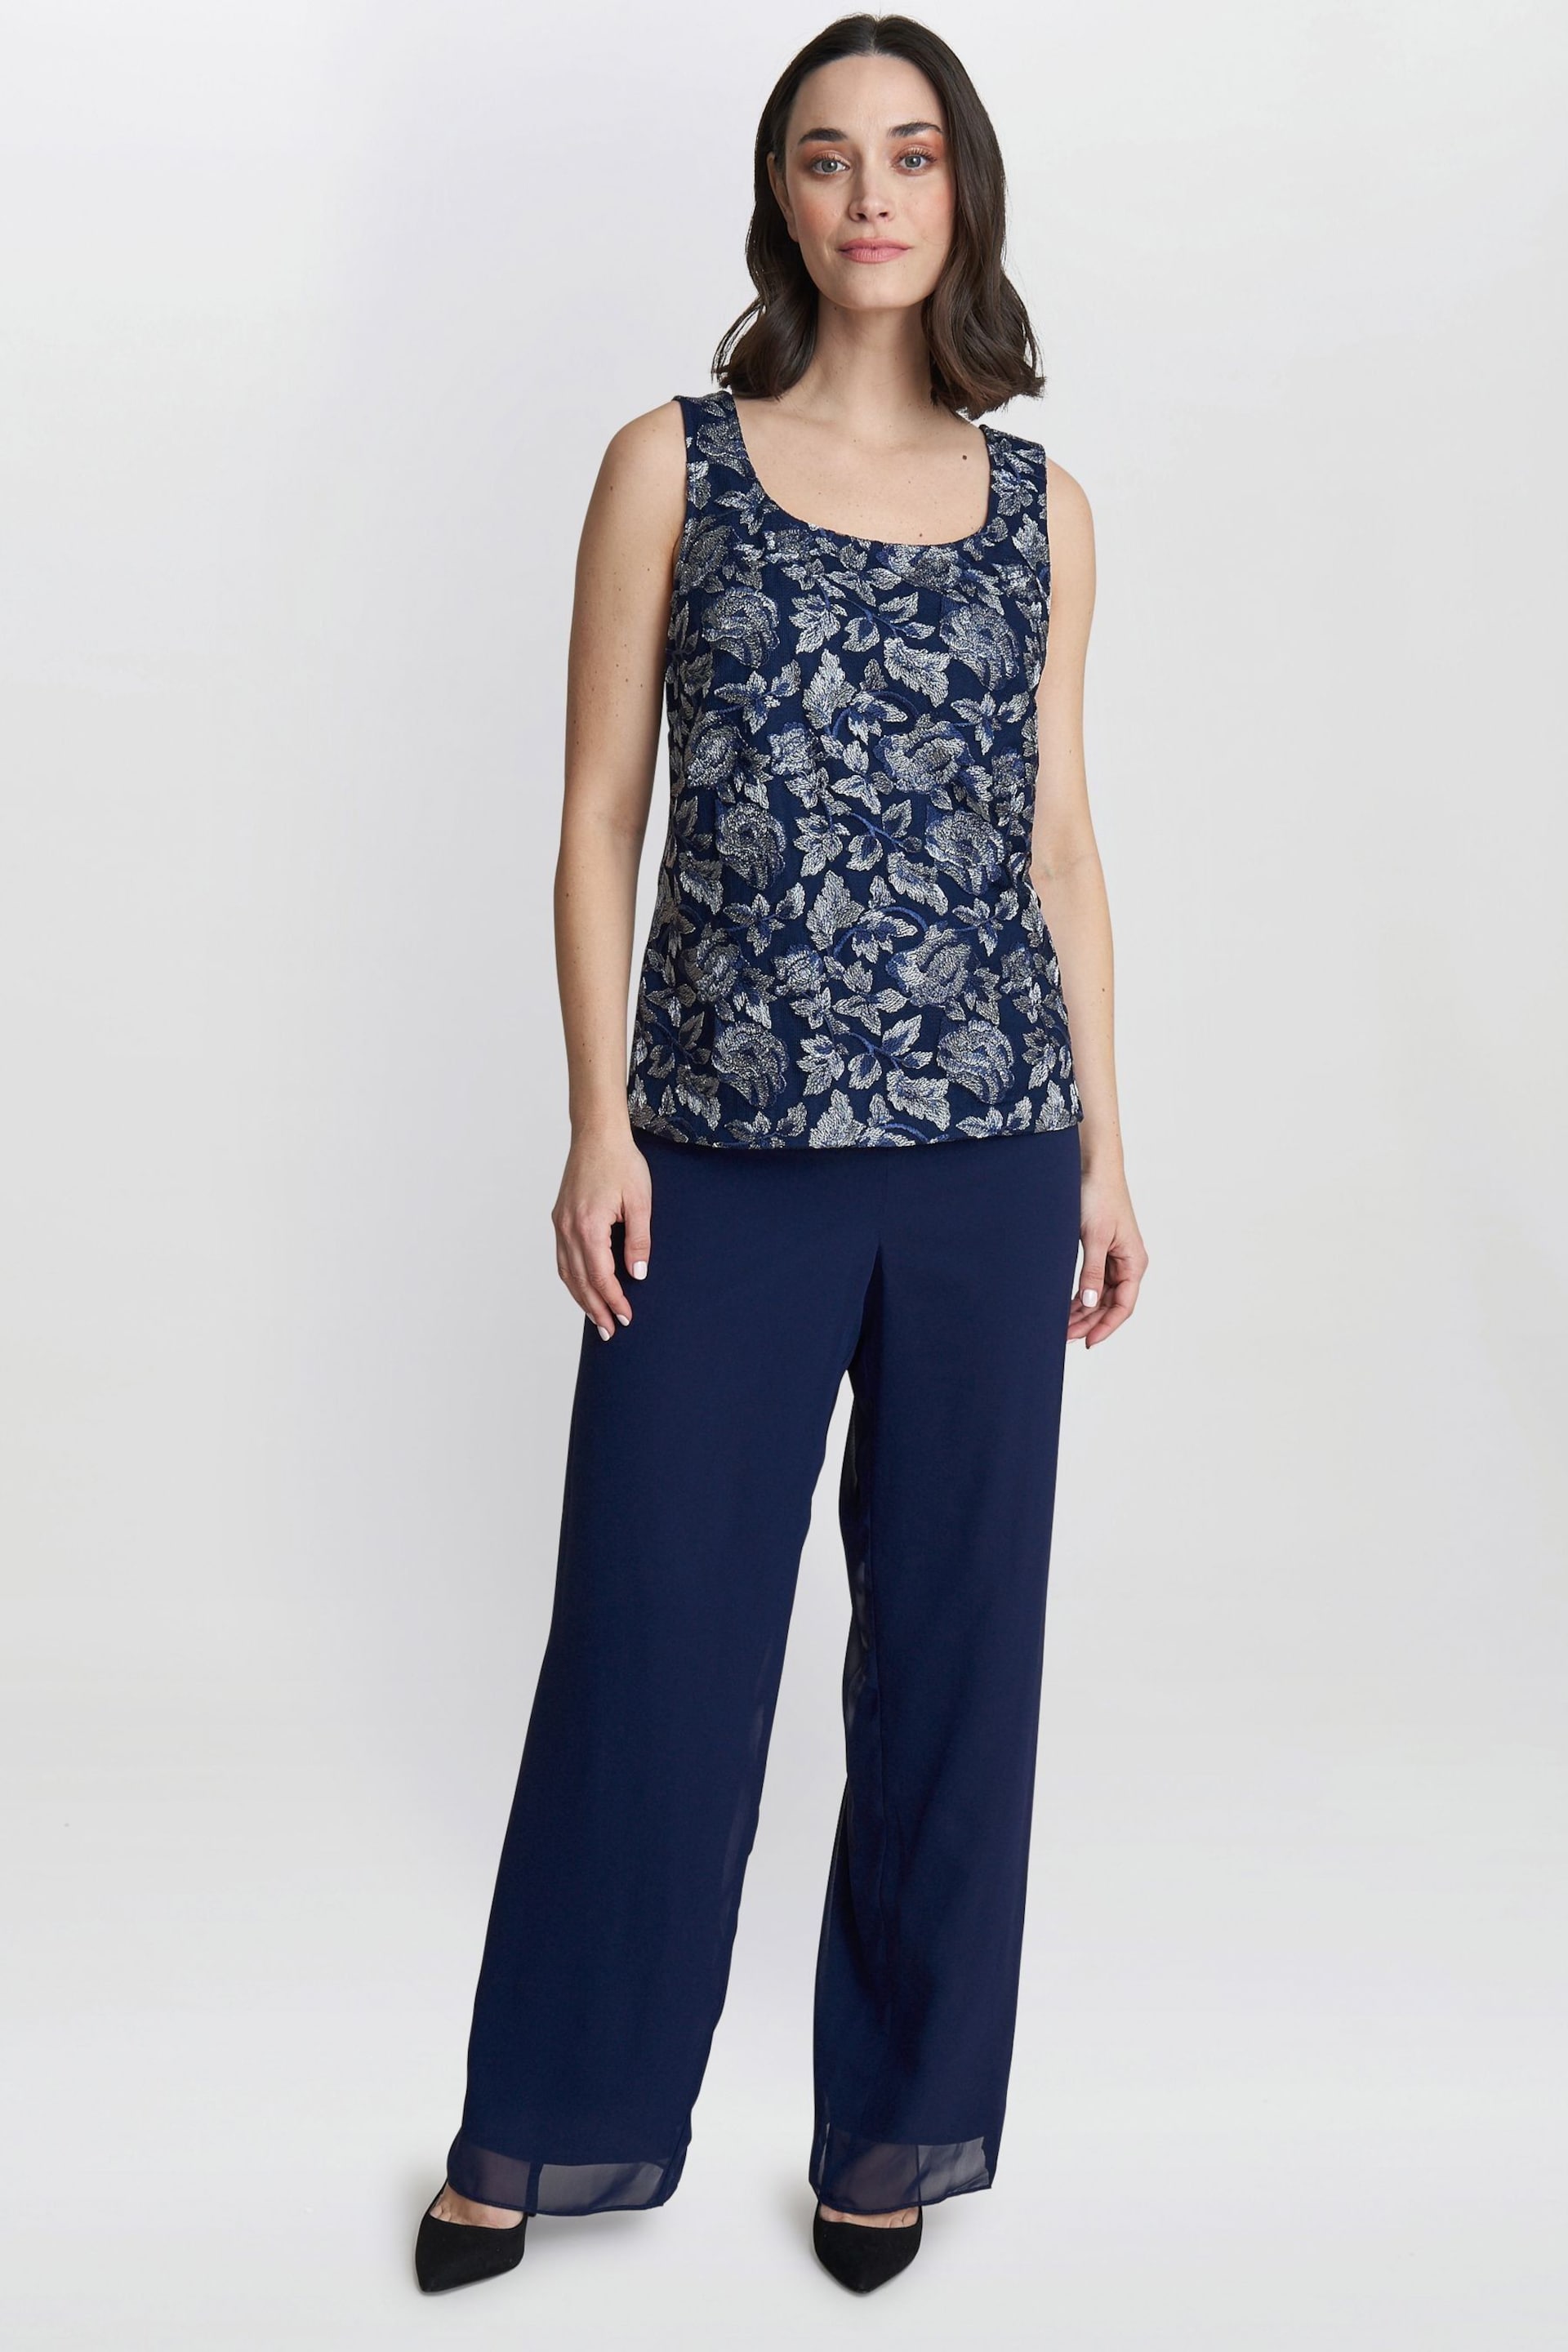 Gina Bacconi Blue Nikki 3 Piece Trousers Suit: With Embroidered Tank Top And Elongated Jacket - Image 4 of 6